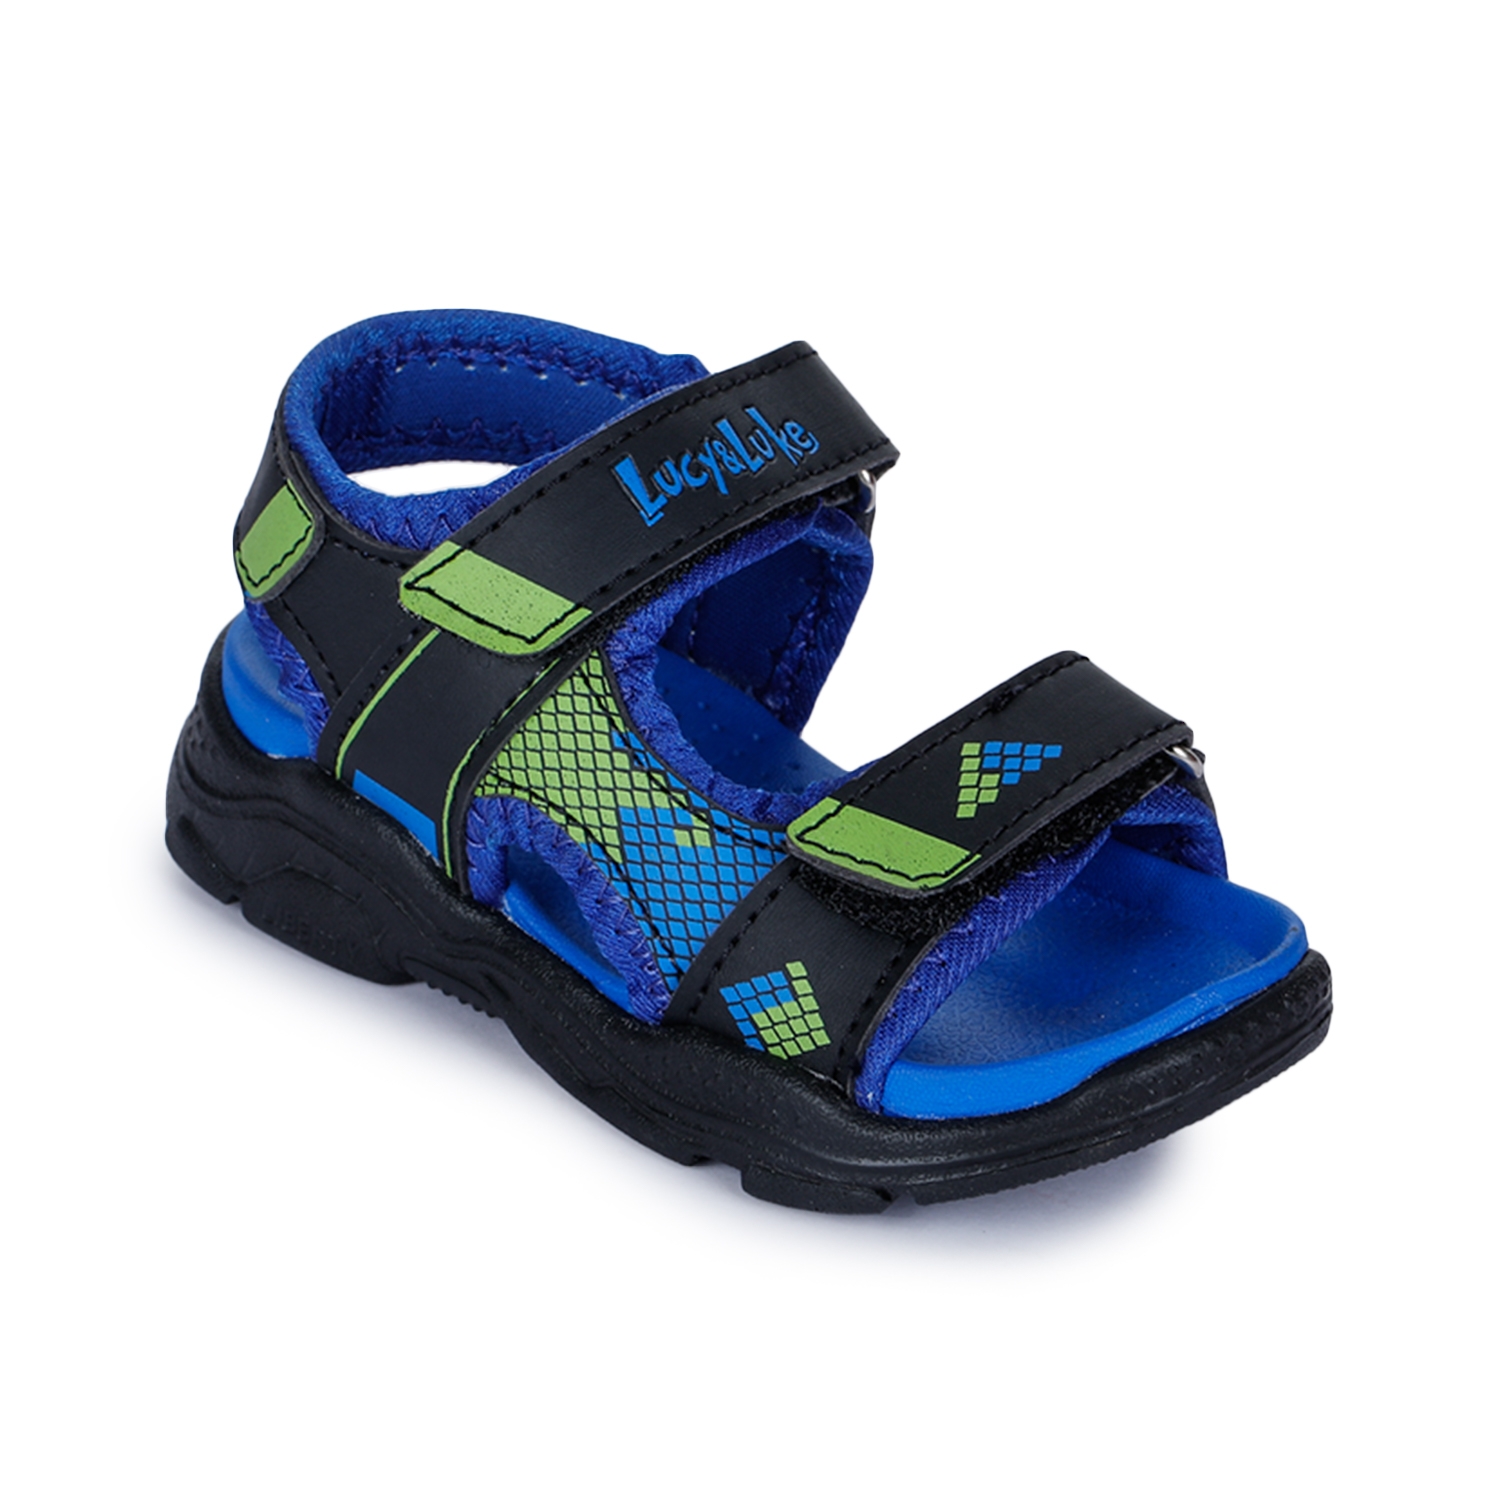 Lucy & Luke by Liberty RICKY-6 Blue Sandals for Kids